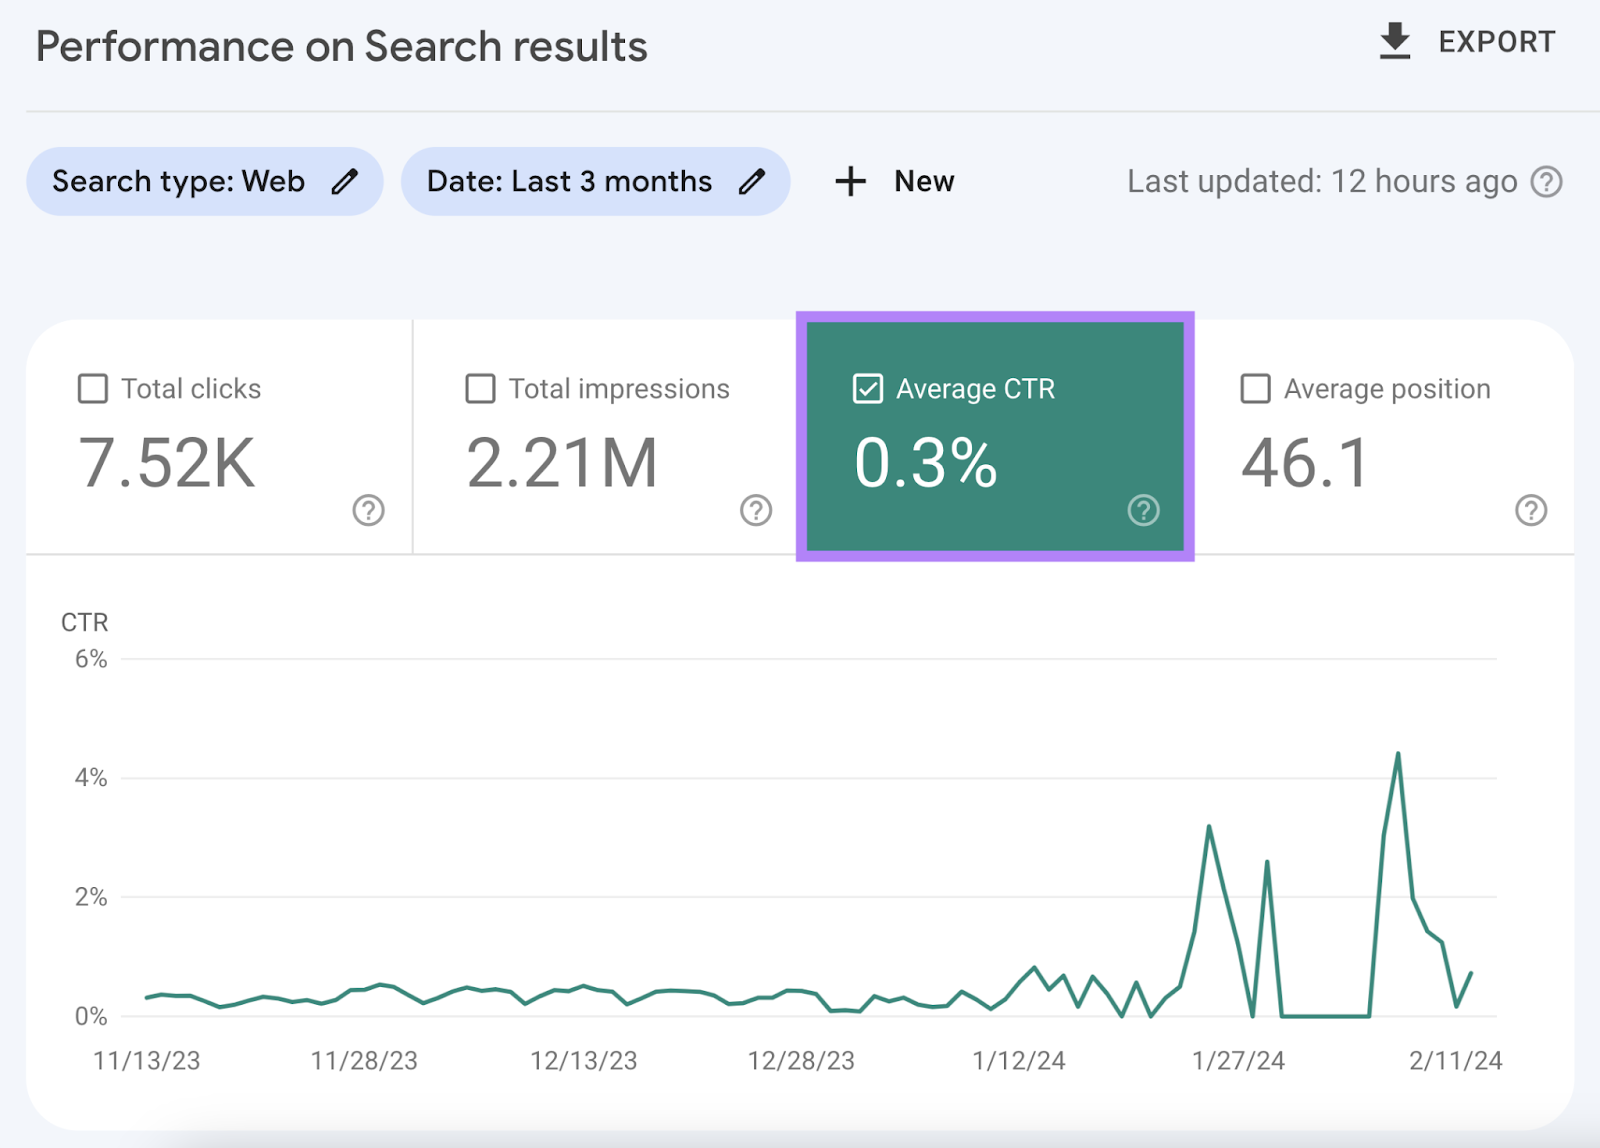 Performance on Search results dashboard, with "Average CTR" widget highlighted in GSC